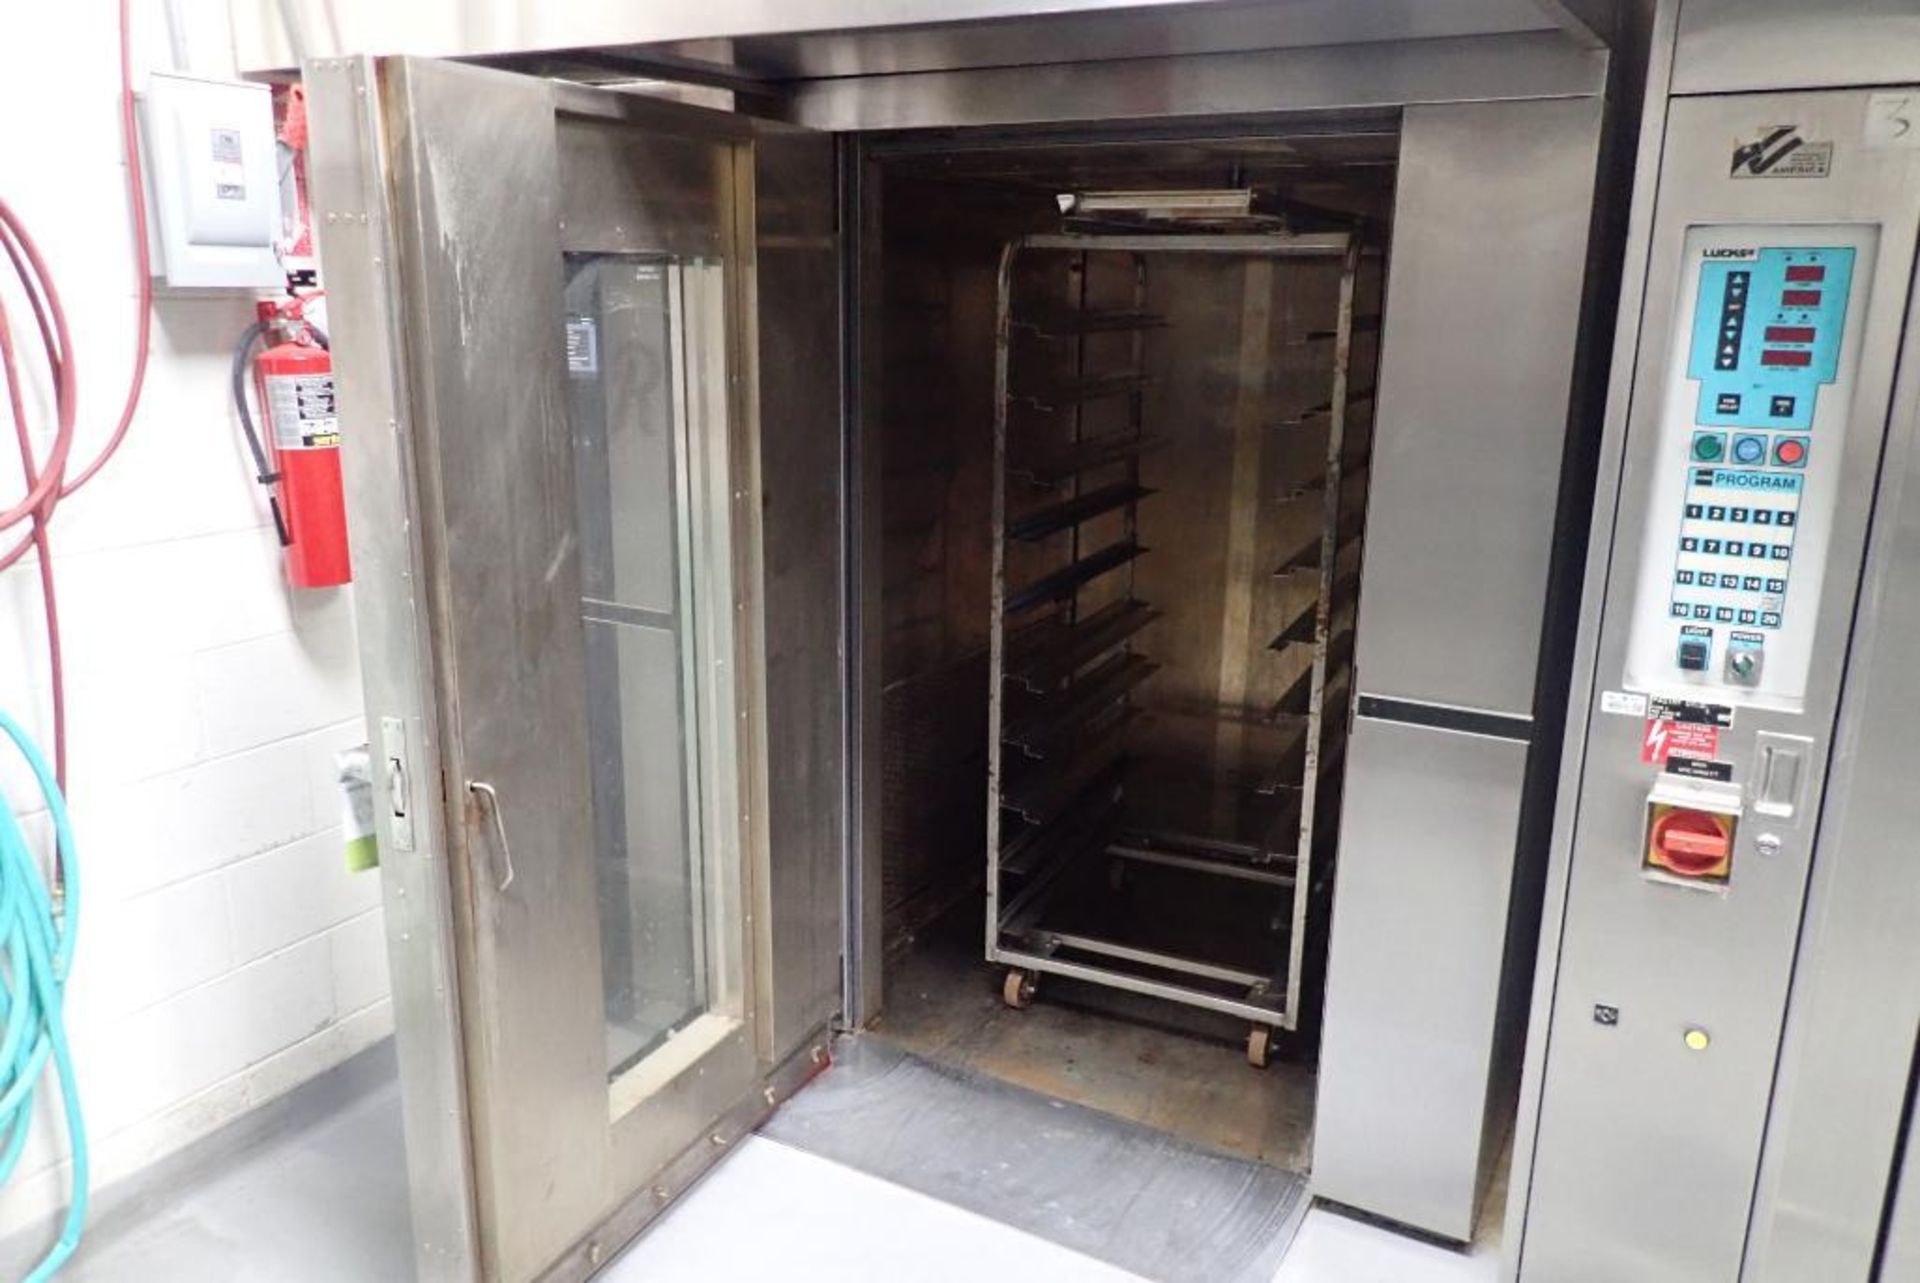 Revent double rack oven - Image 4 of 21